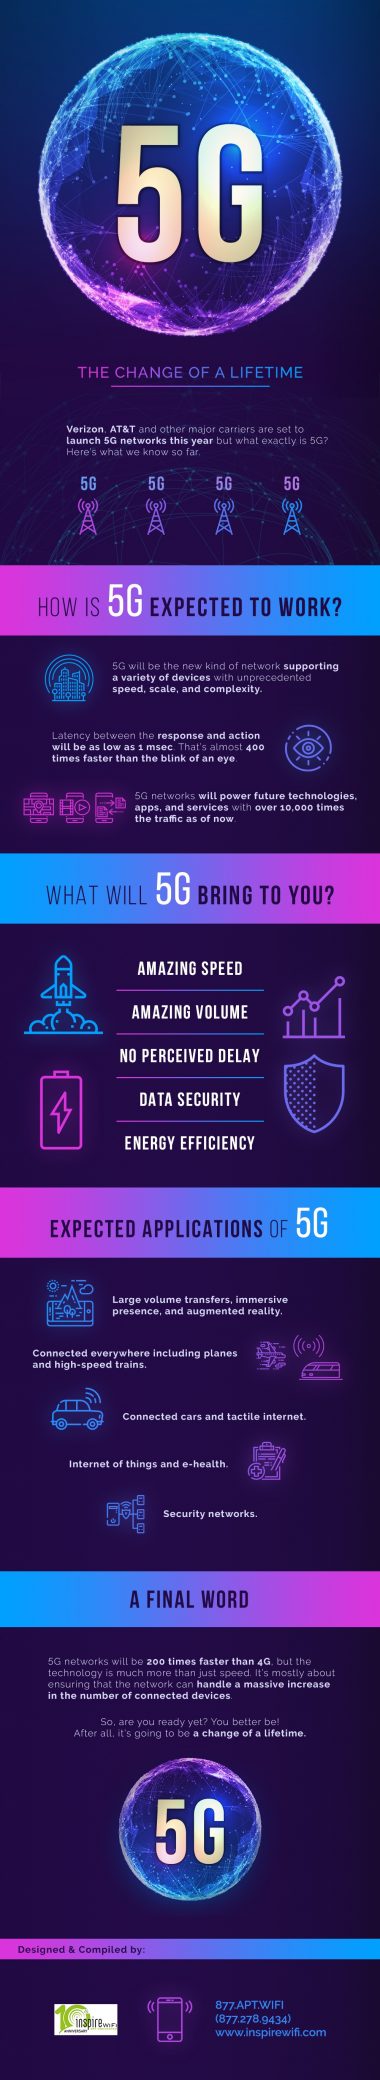 The Possible Rise of 5G: The Superfast Change of a Lifetime [Infographic]